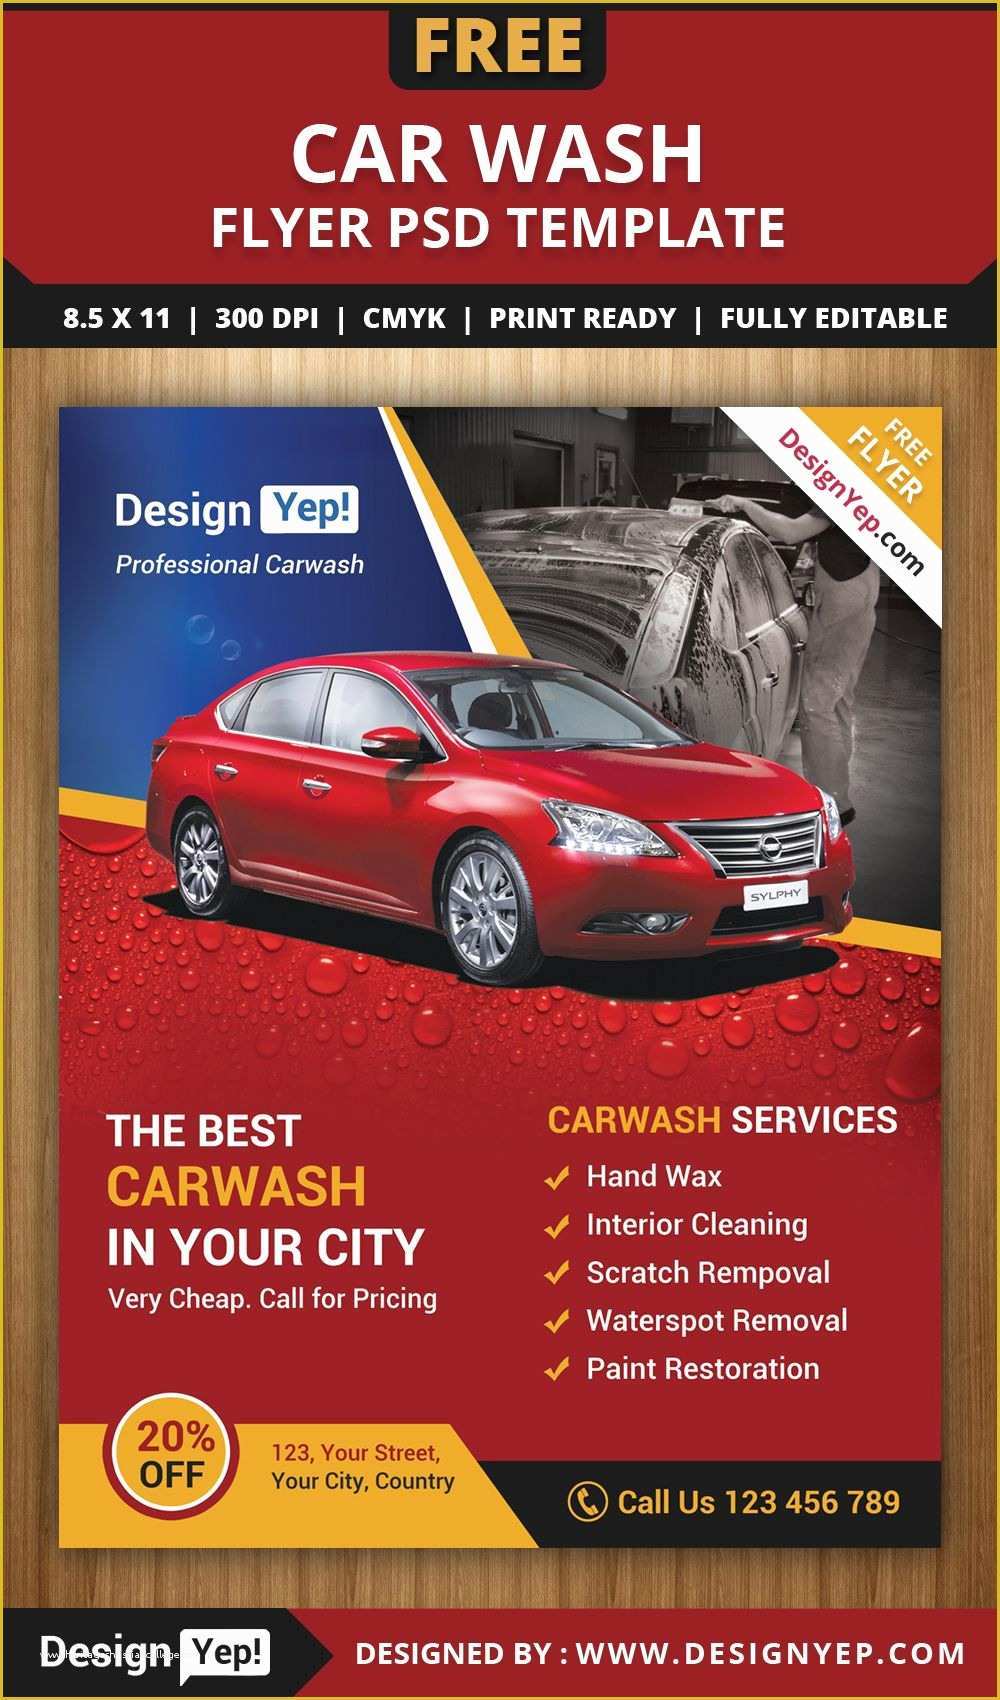 Remodeling Flyer Templates Free Of Free Car Wash Flyer Psd Template 3232 Designyep